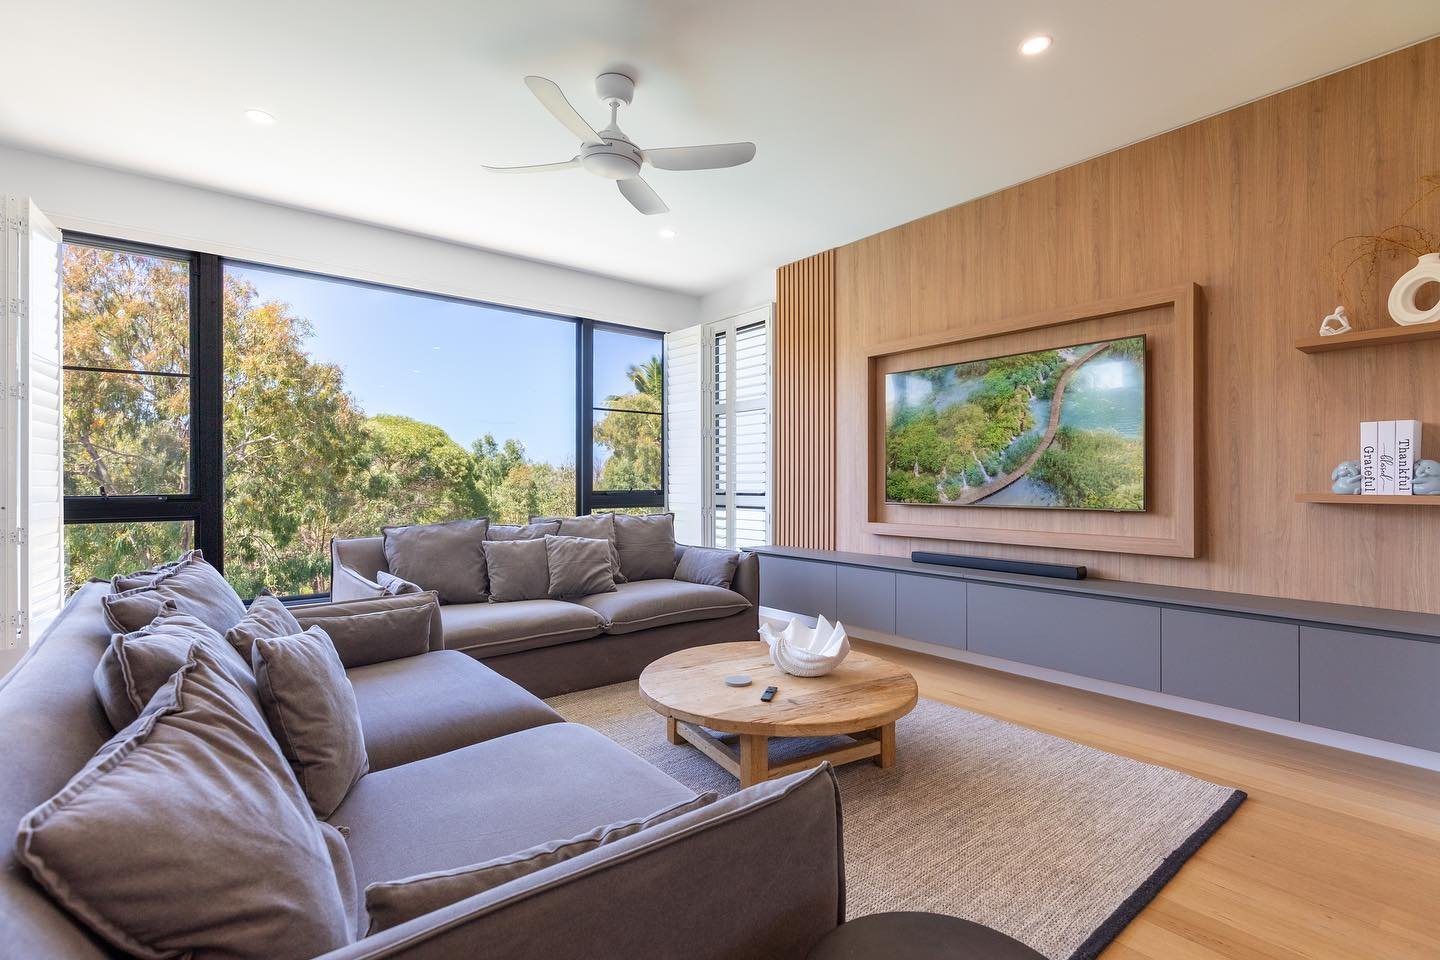 ✨ APRIL BOOKINGS ✨
 
Limited new bookings are now available for the end of April for The Dūne!

This stunning 4 bedroom home is complete with dual living rooms, outdoor dining and private swimming pool. Close by to Main Beach and the shops and cafes 